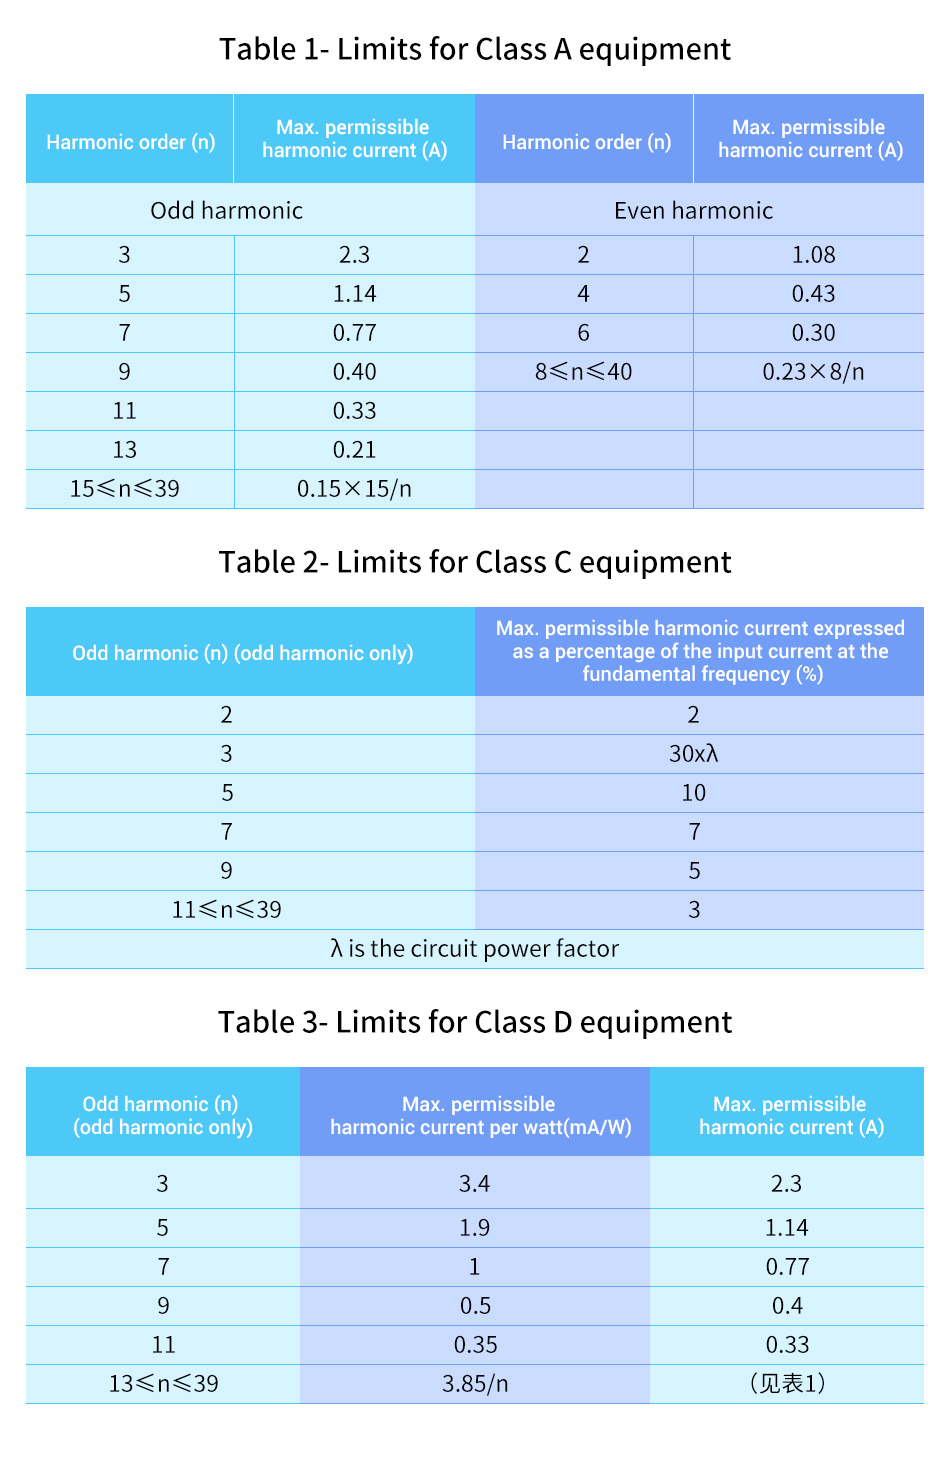 Table 1- Limits for Class A equipment